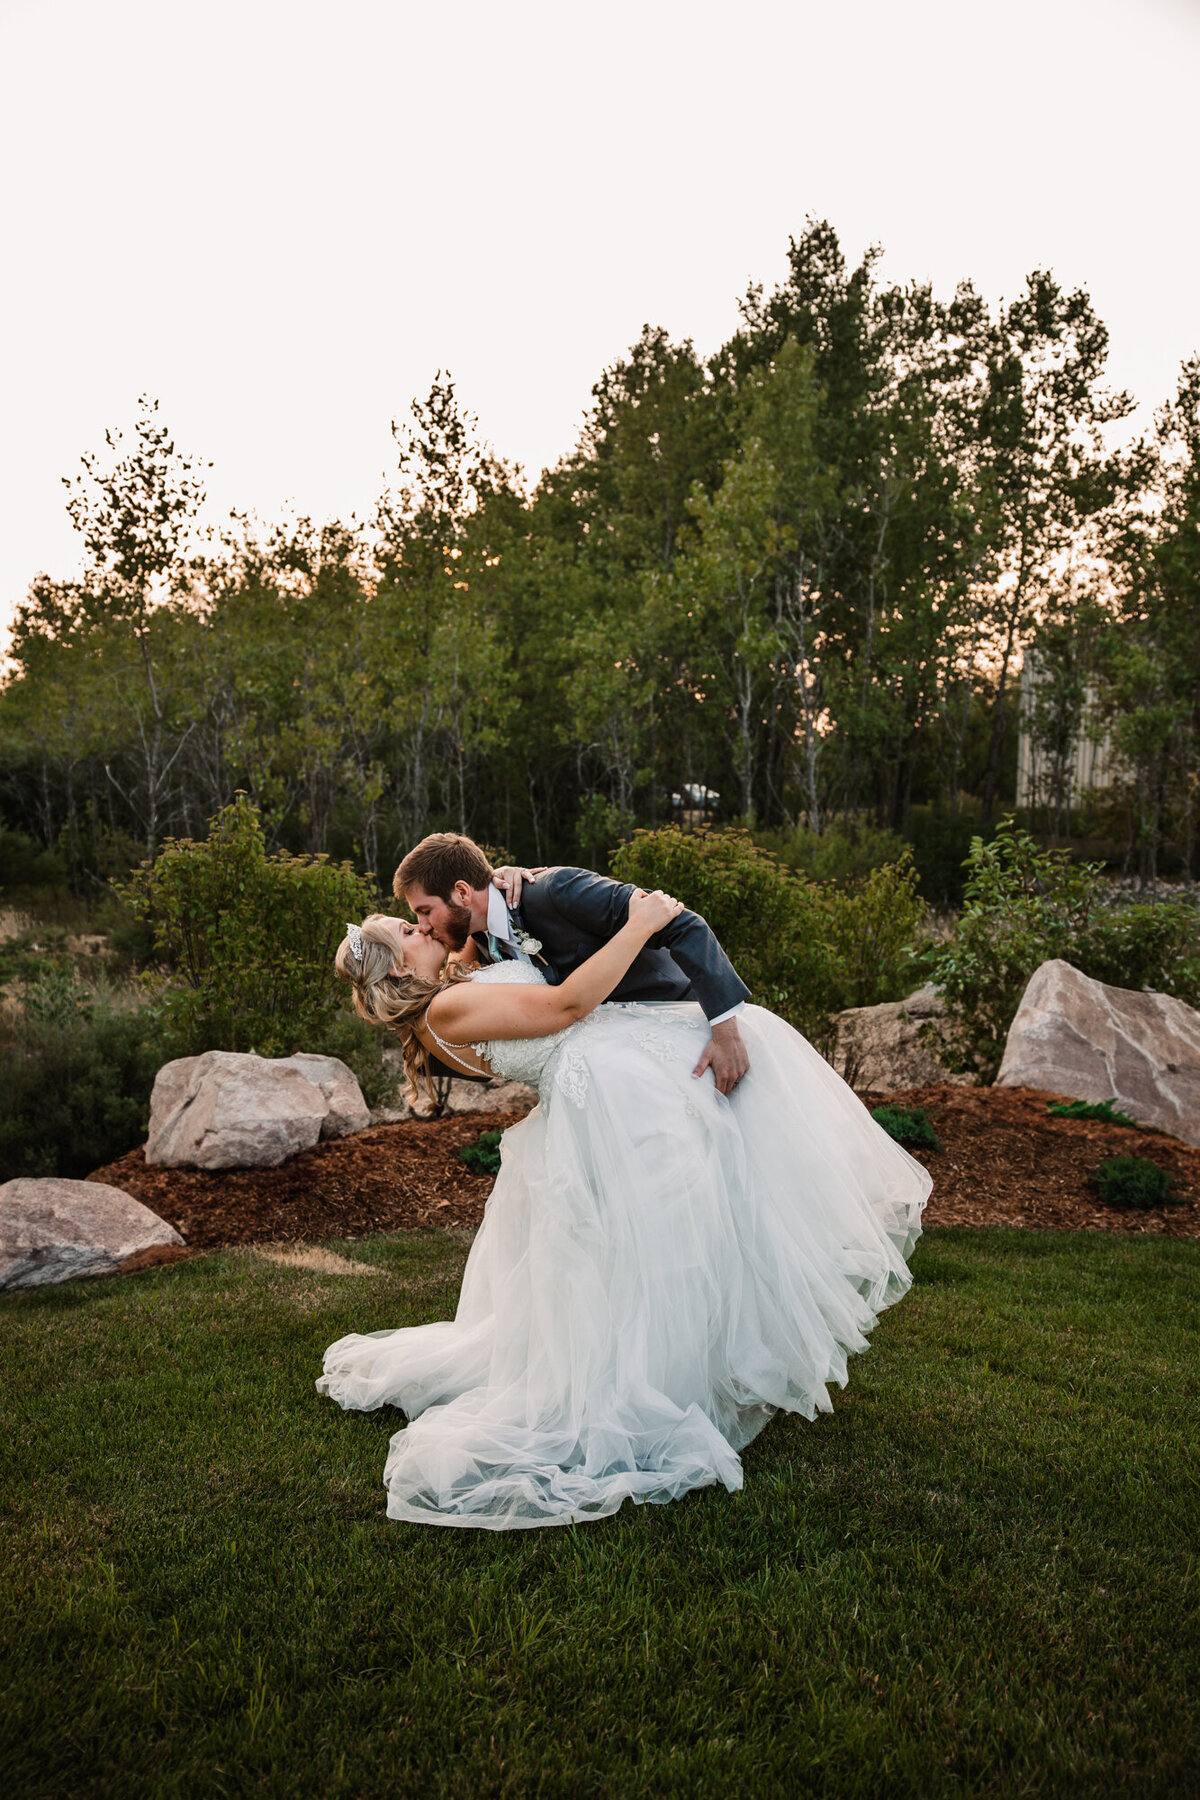 groom dips bride in grassy area while kissing